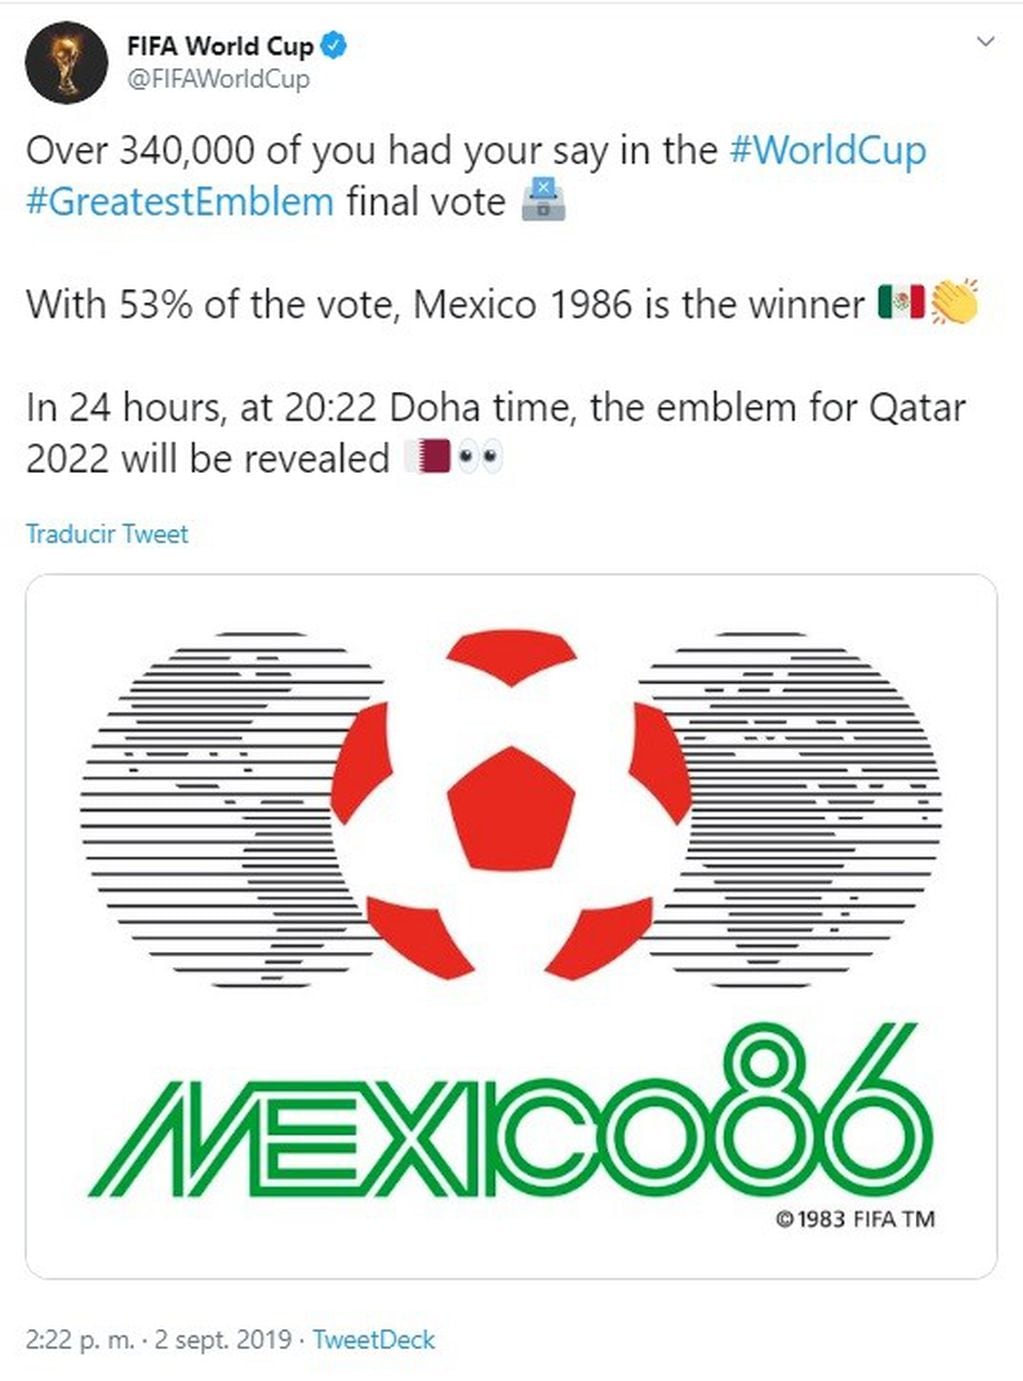 (Twitter: @FIFAWorldCup)